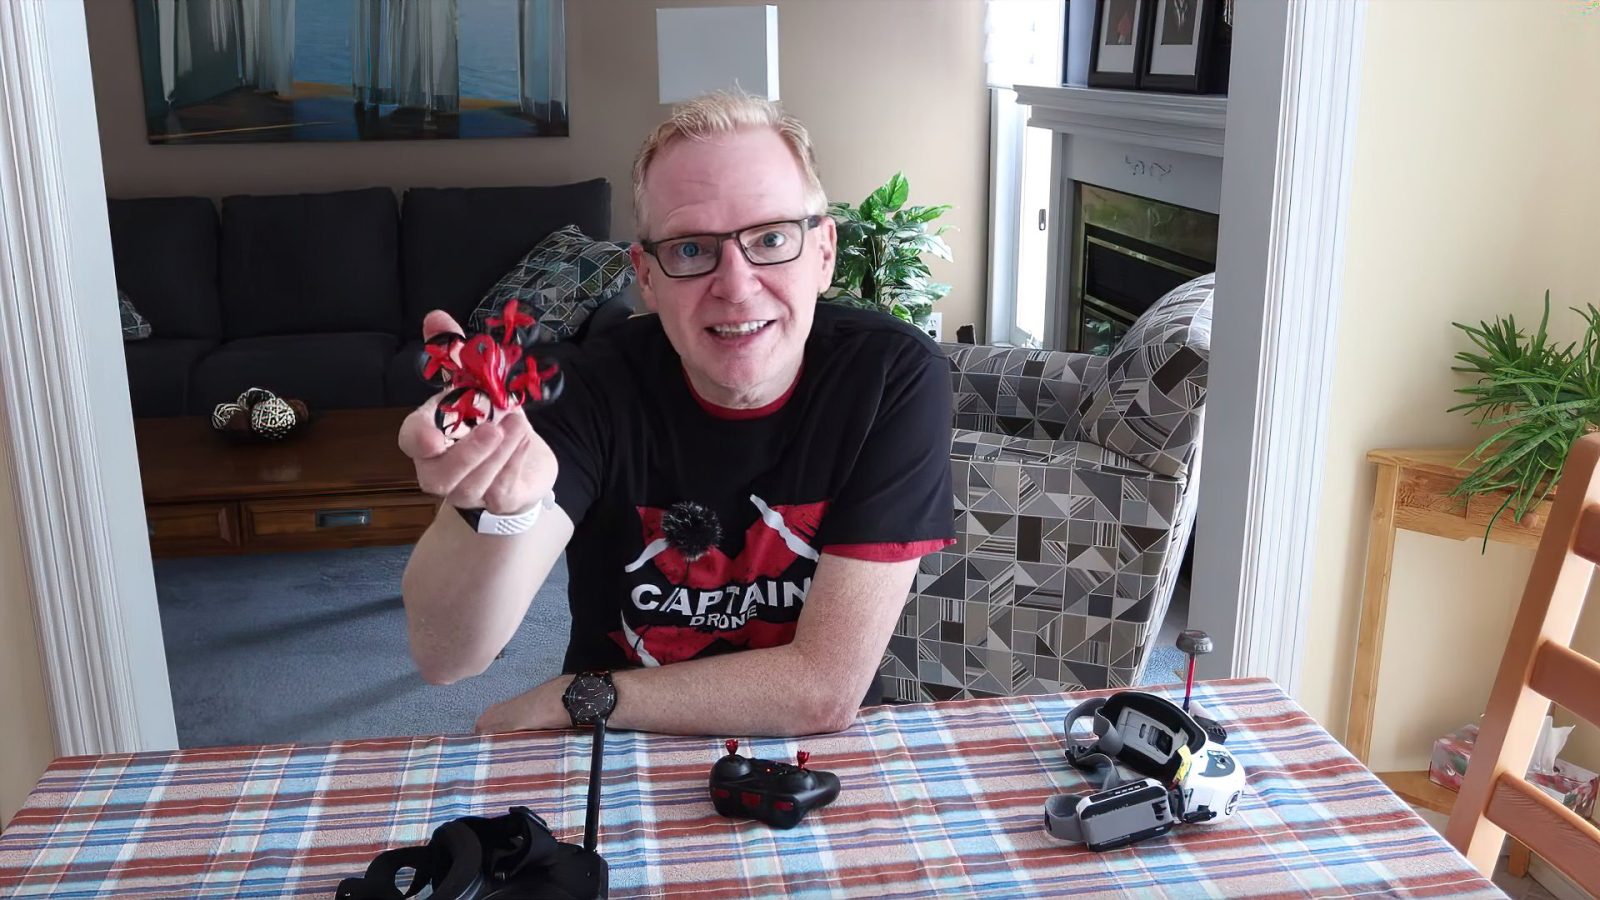 Eachine E013 is a great starter FPV drone, says Captain Drone